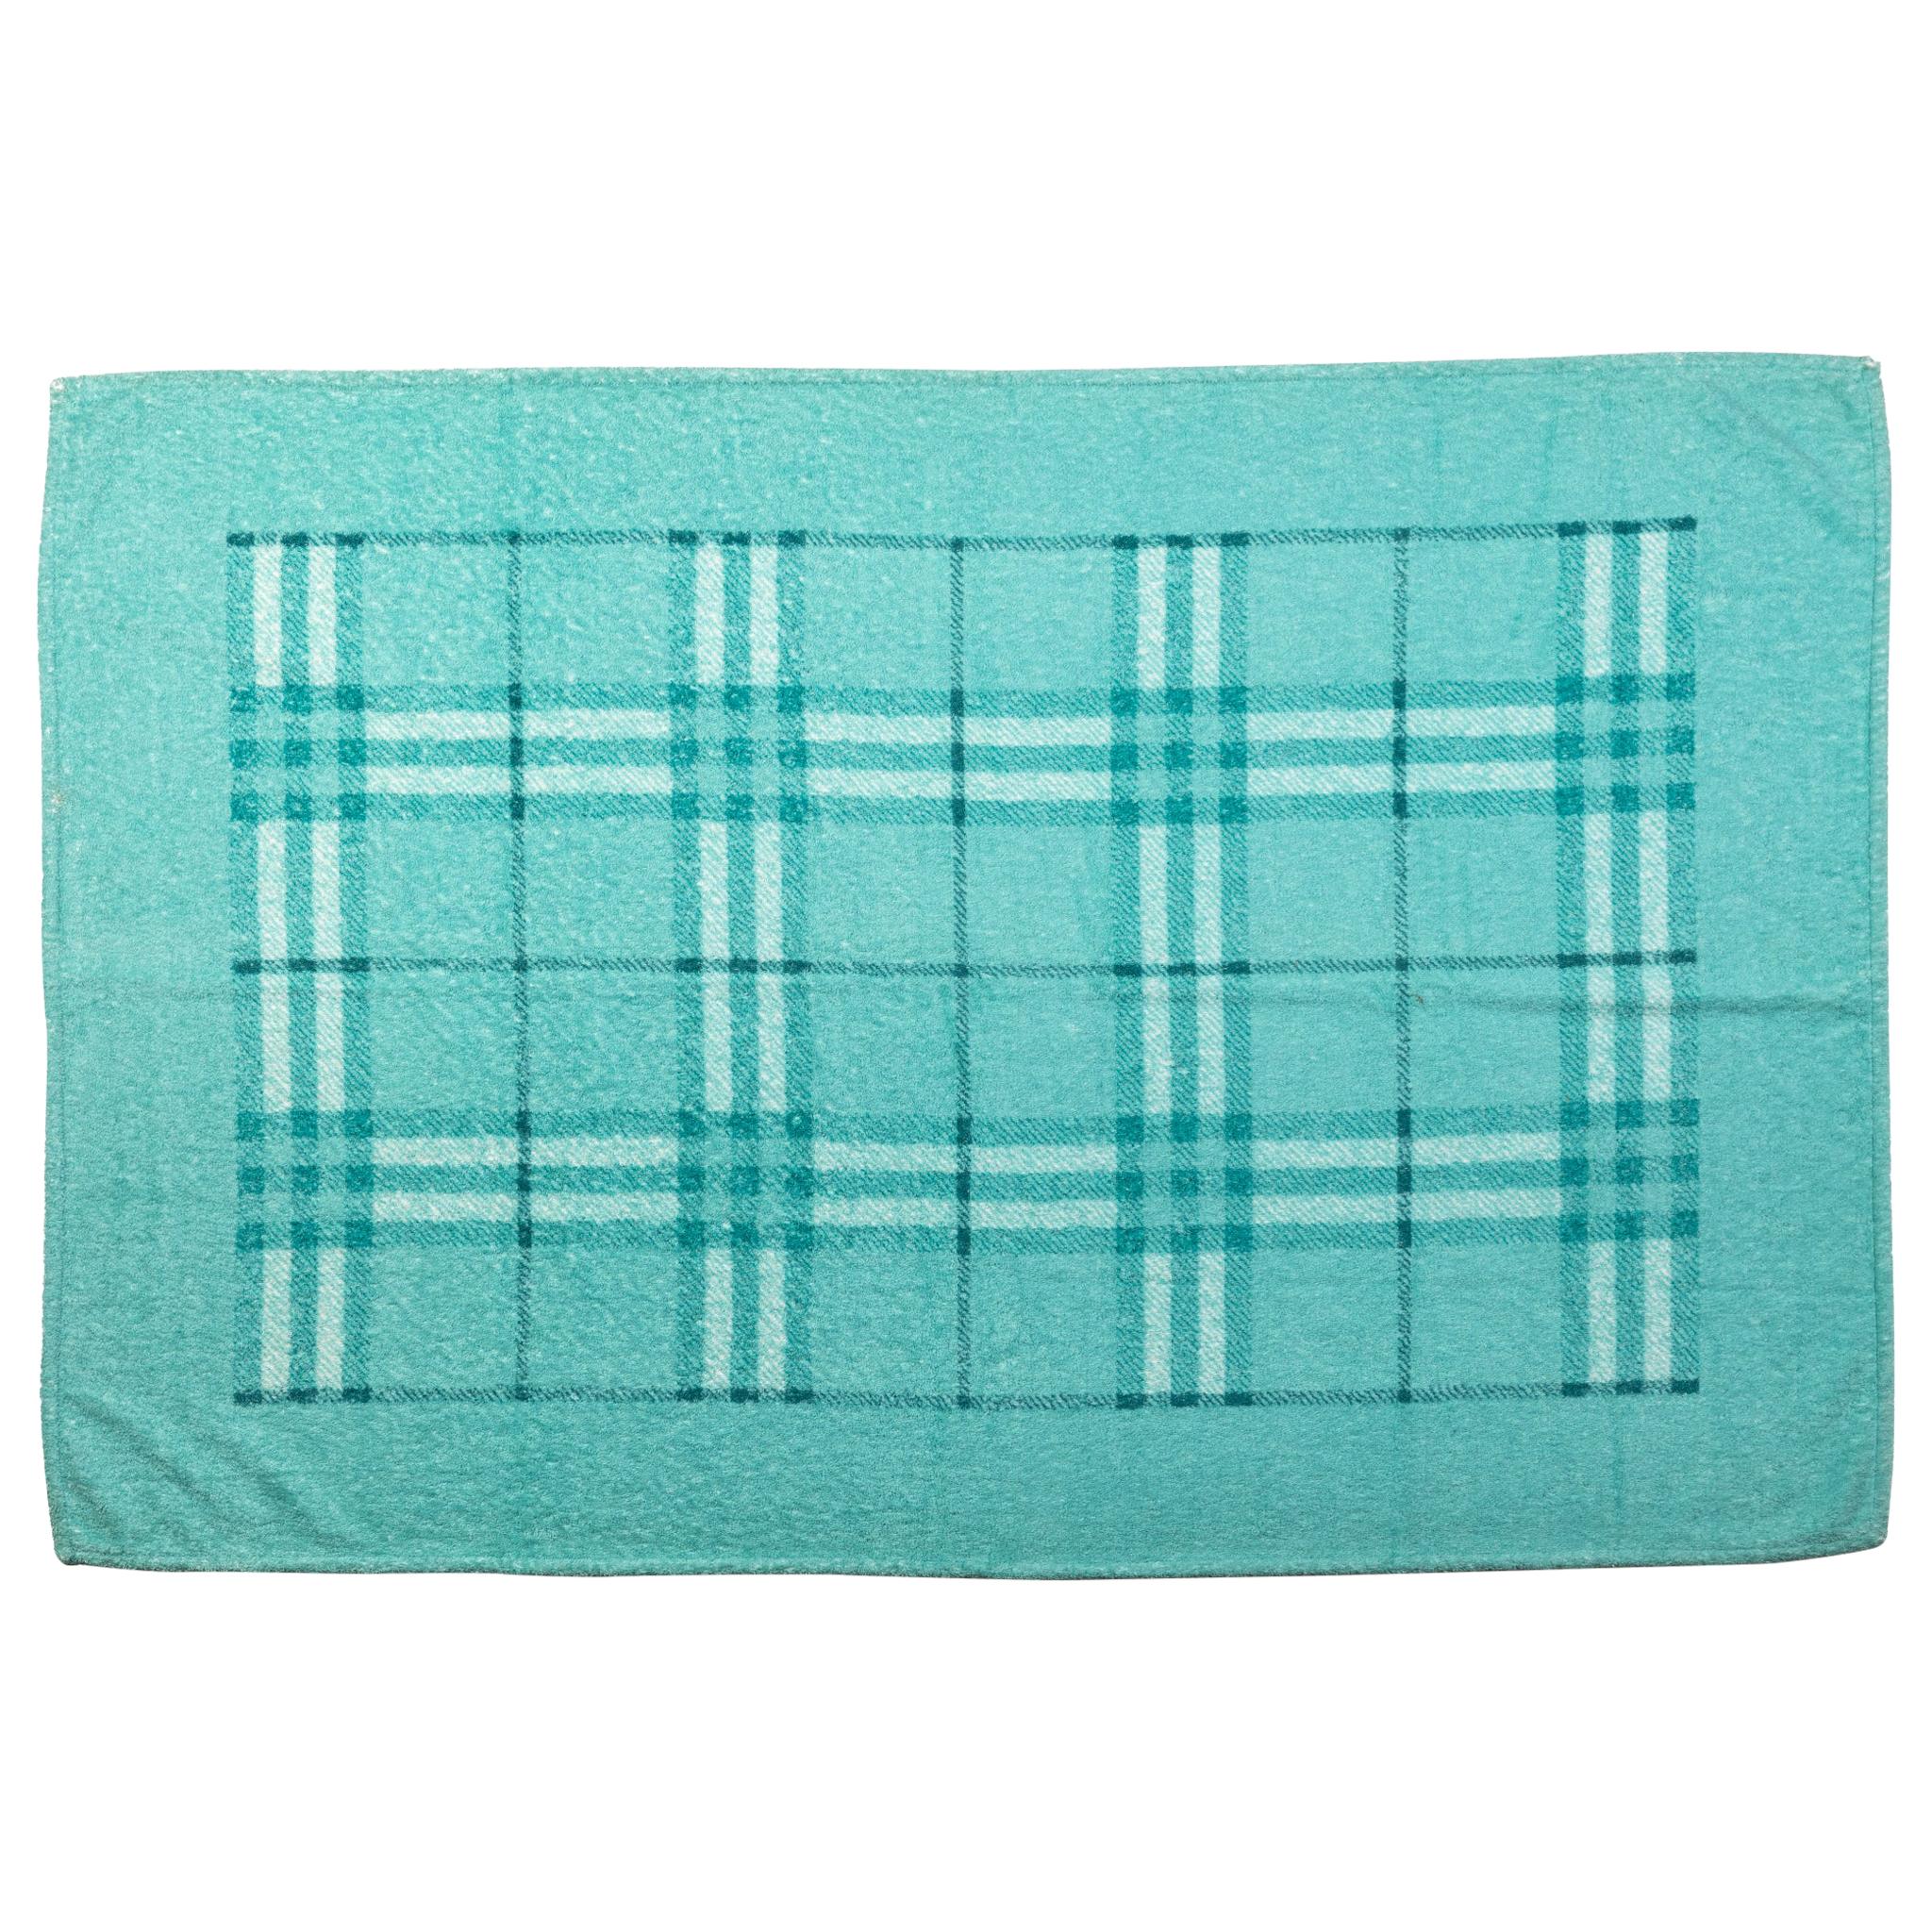 New Burberry New Turquoise Cotton Towel For Sale